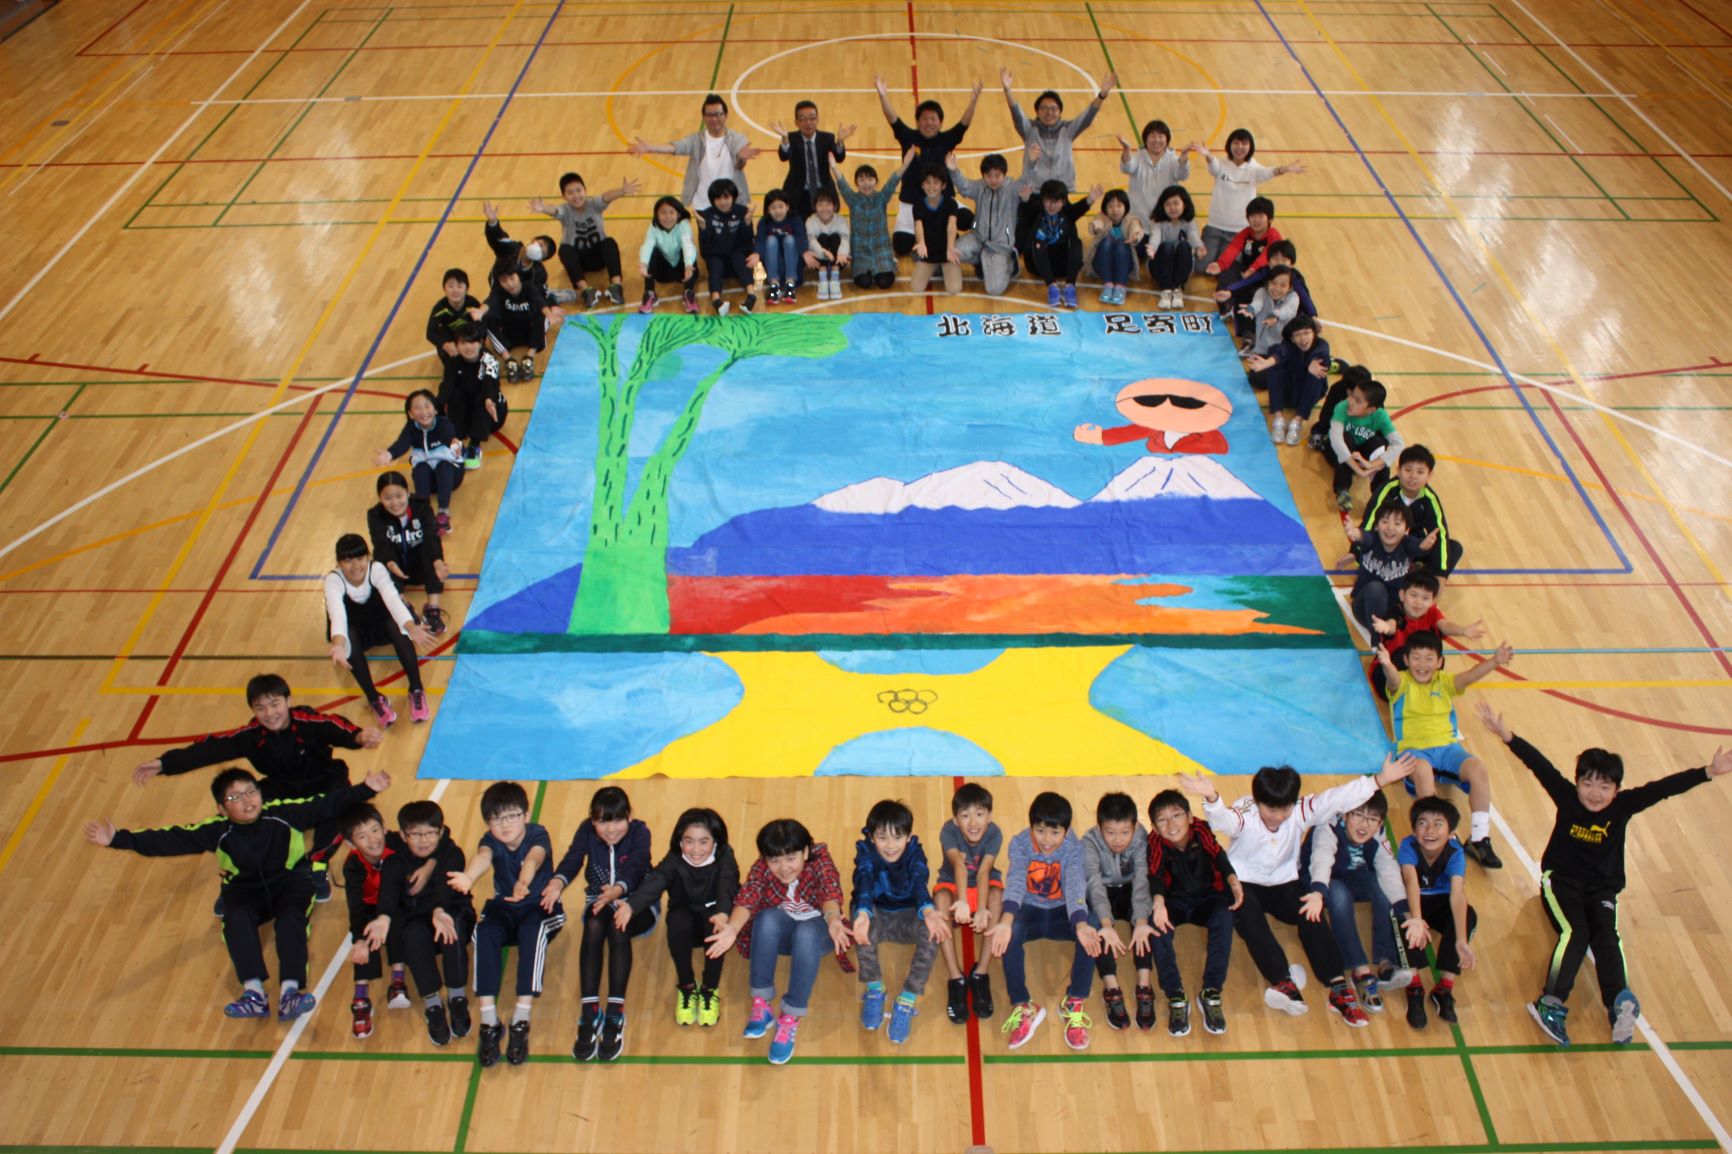 The Biggest Painting in the World 2020 Ashoro town was completed